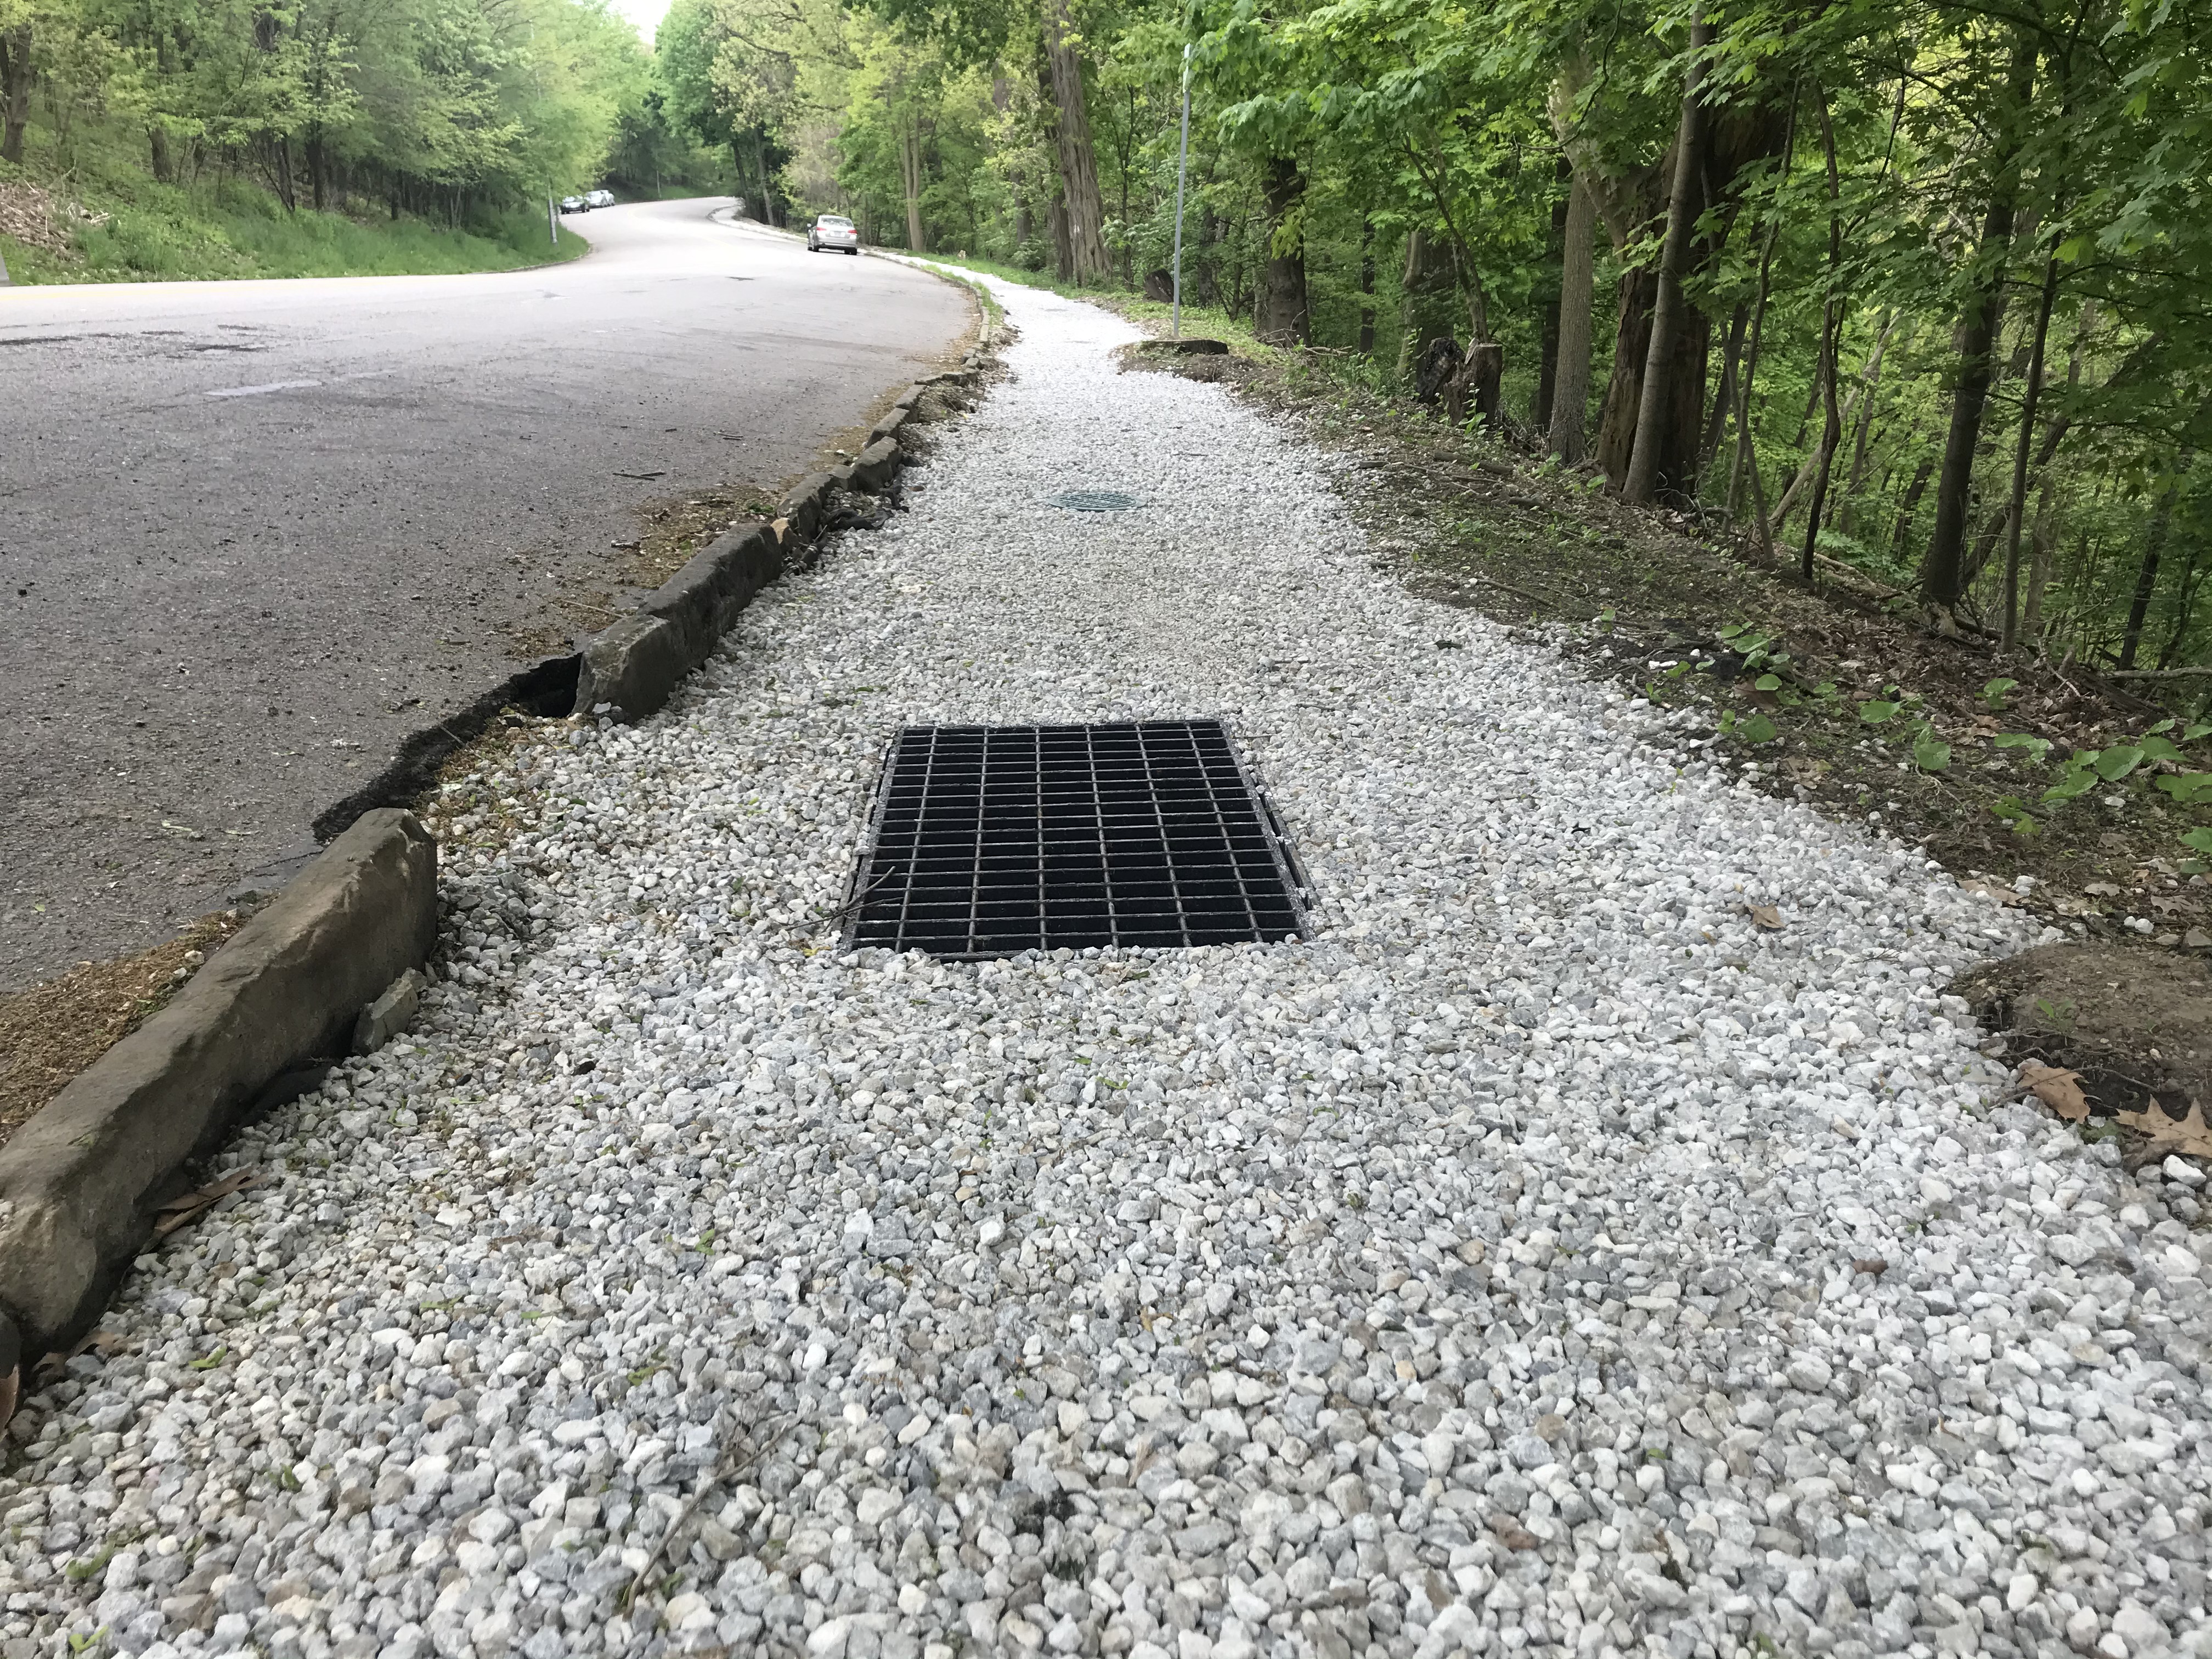 A gravel channel with a storm drain next to Overlook Drive in Schenley Park